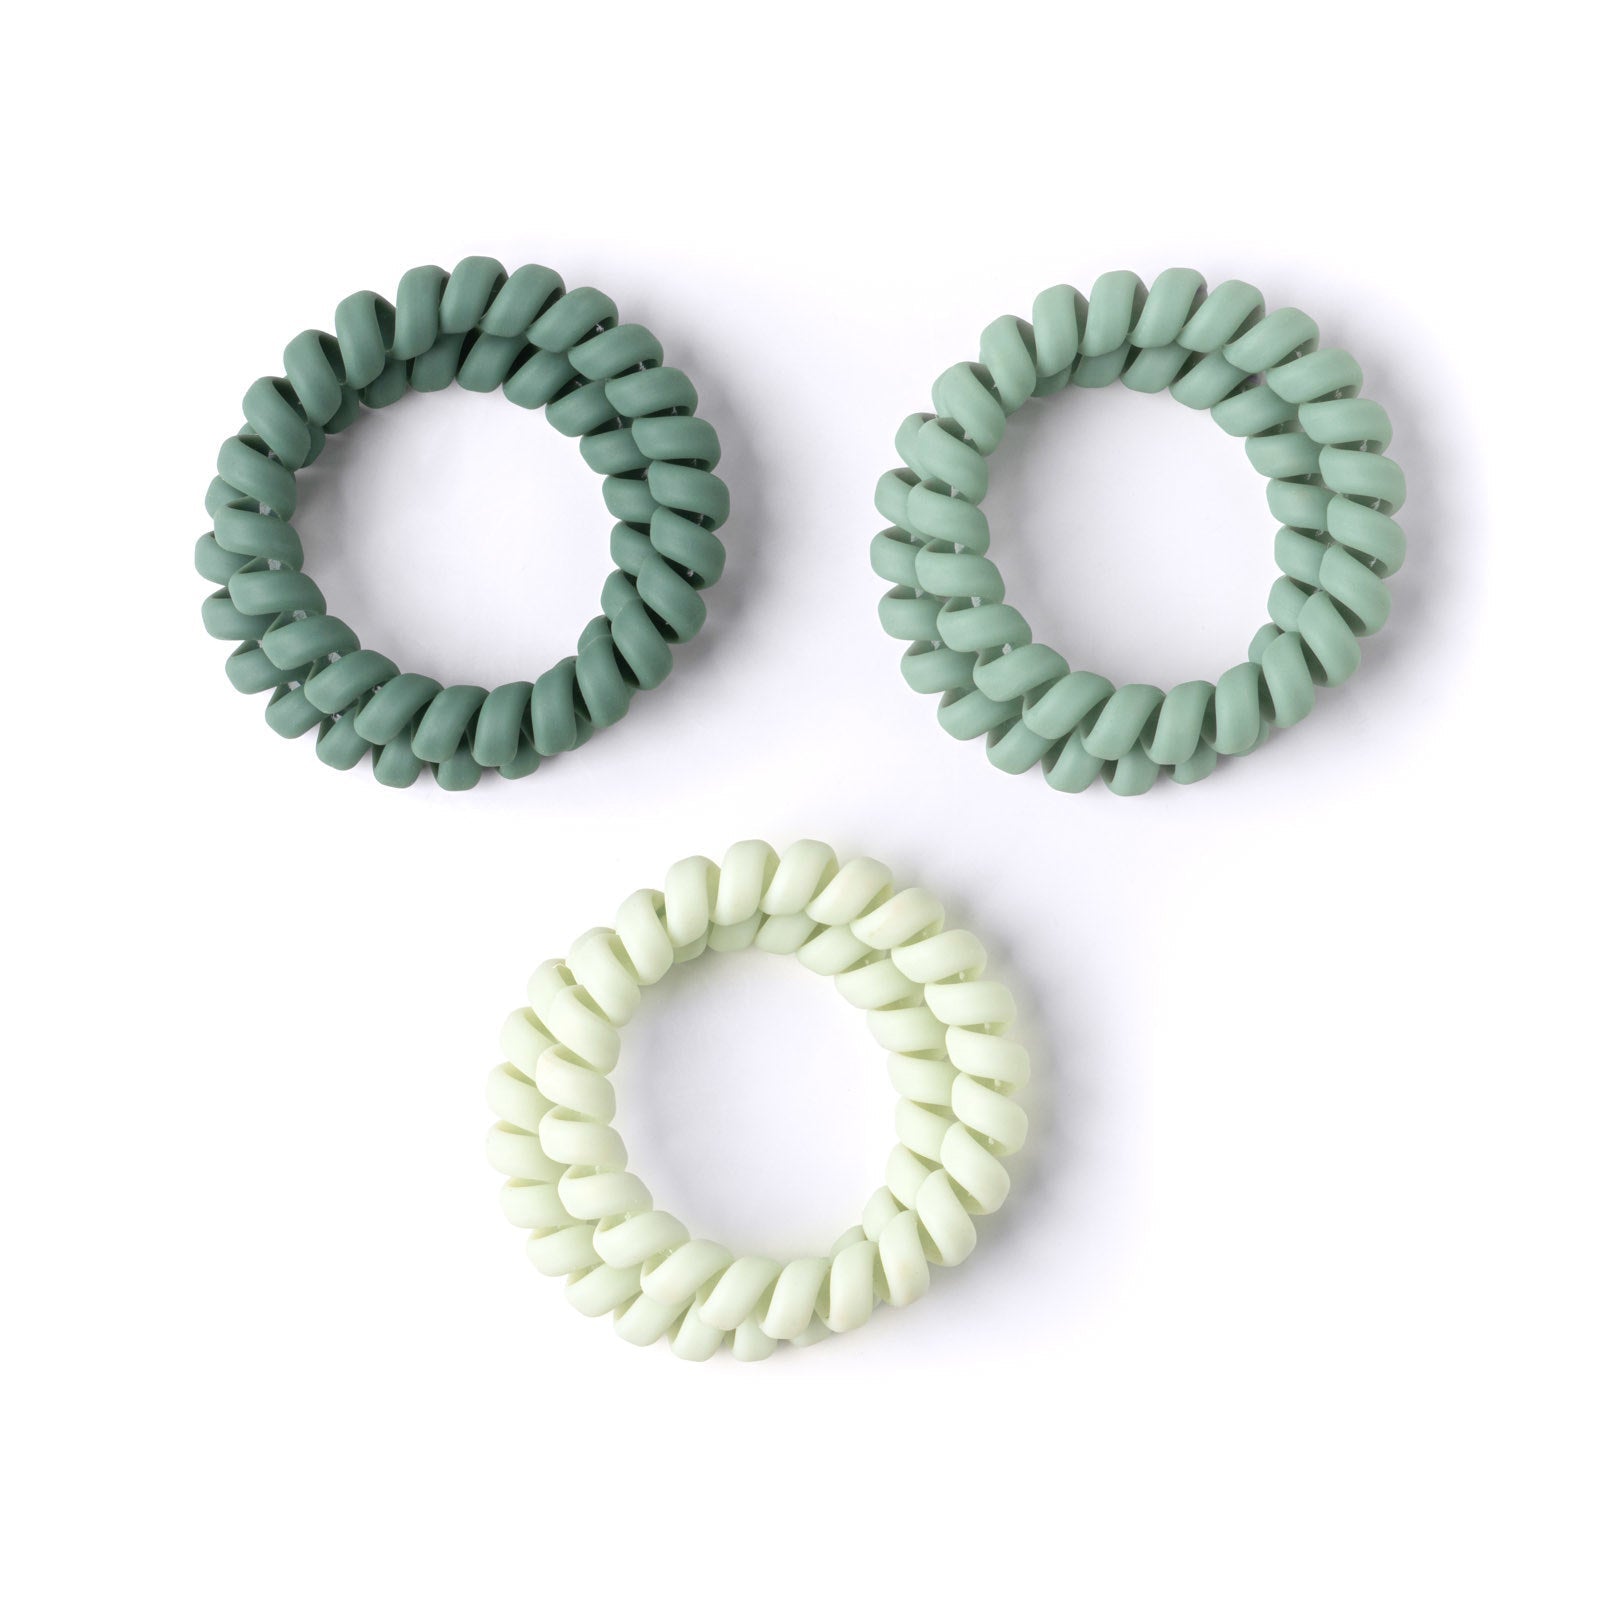 Shop Kinda Spiraling Coil Hair Ties-Hair Ties at Ruby Joy Boutique, a Women's Clothing Store in Pickerington, Ohio